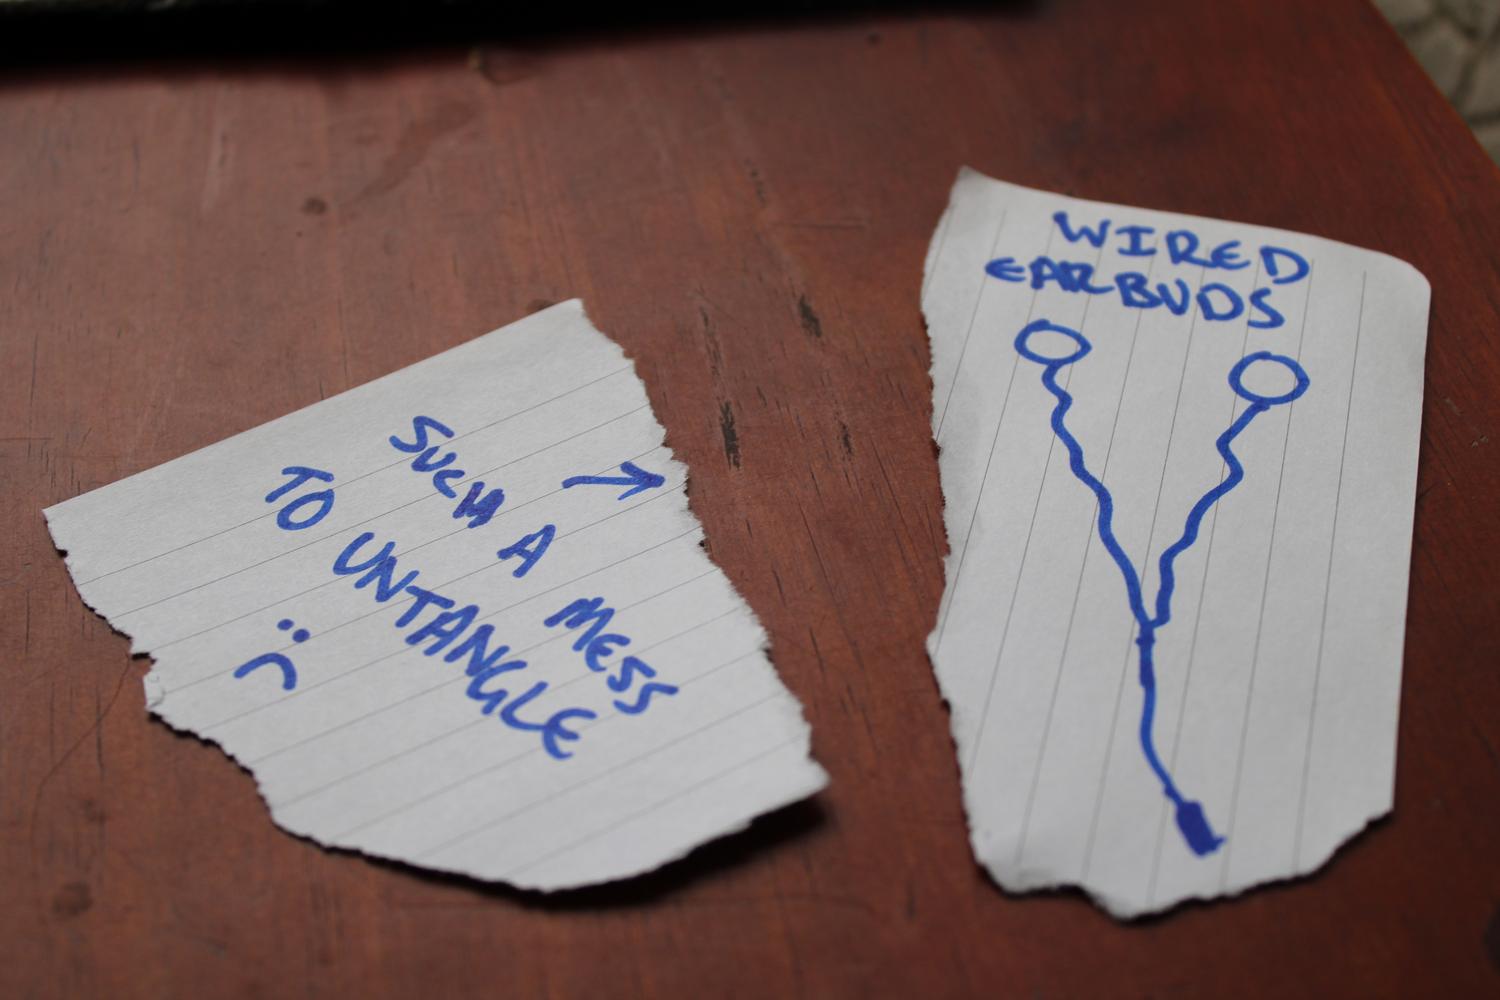 A close up photo of a table surface with two pieces of paper. One on the left says "Such a mess to untangle" with a sad face and an arrow pointing to the right. The piece of paper on the right is a ridiculously bad drawing of wired earbuds with text at the top that reads "Wired earbuds". I no longer had the them in my position so this is supposed to be a placeholder for the real thing.